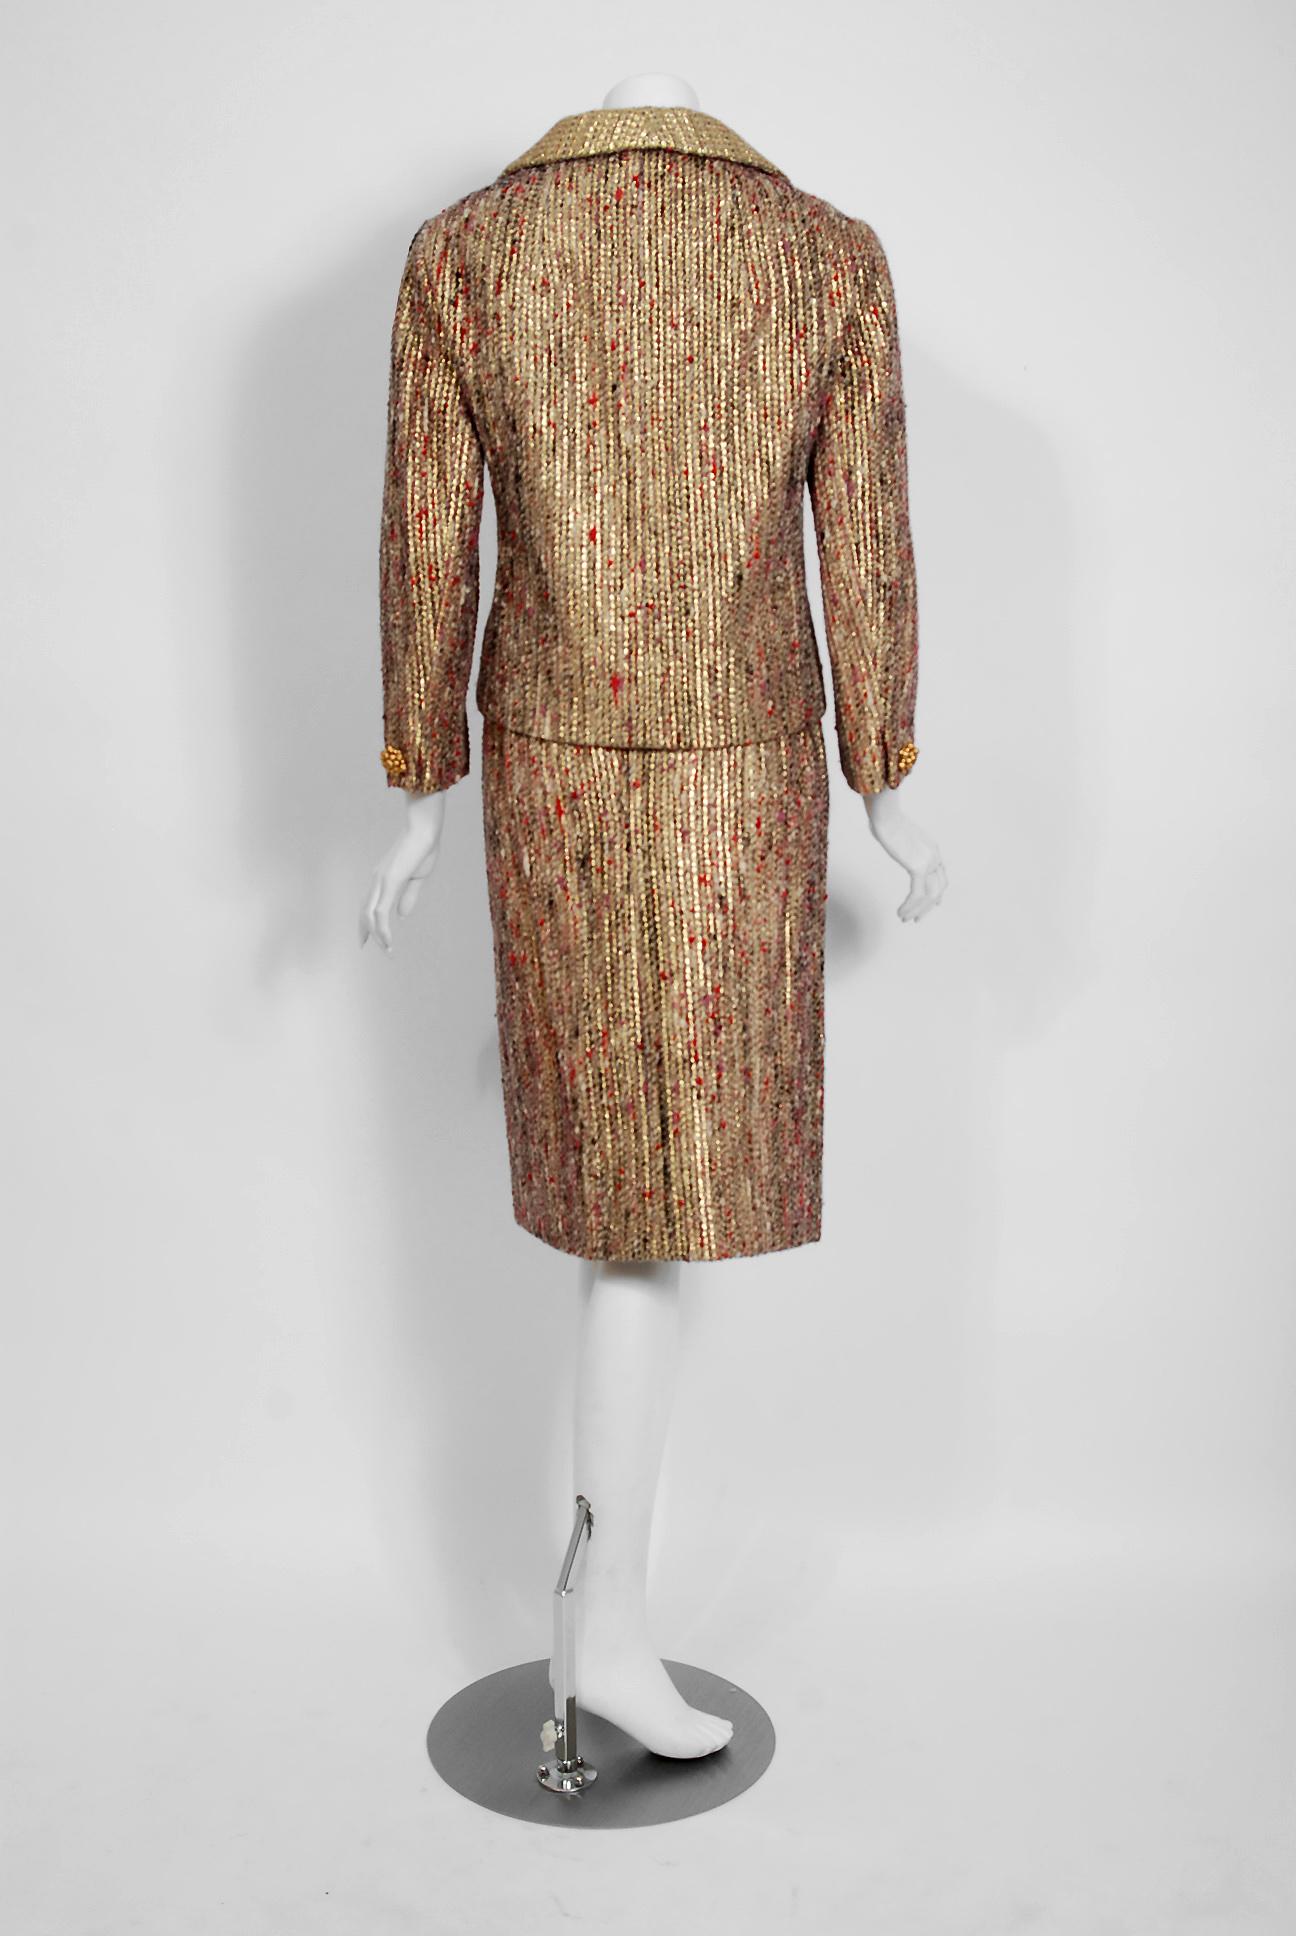 Vintage 1963 Christian Dior Gold Lamé & Textured Wool Documented Dress Suit 1